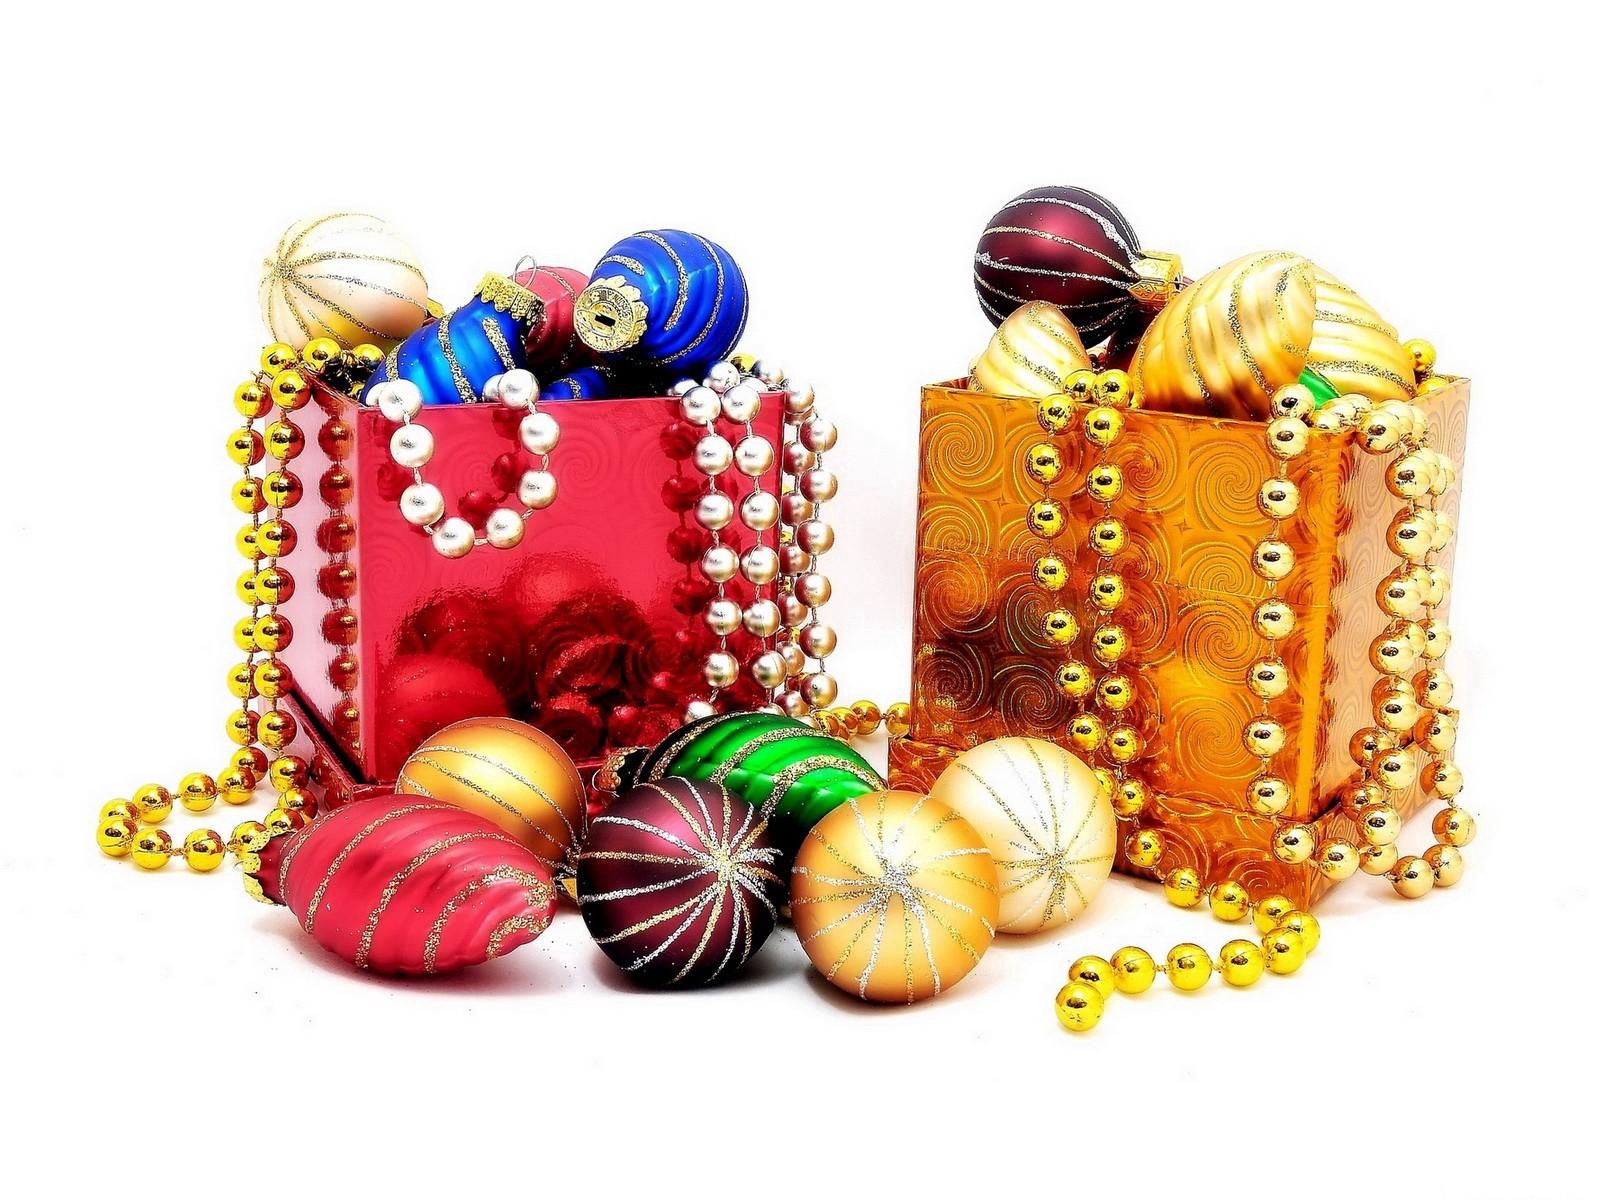 christmas decorations, holidays, decorations, christmas tree toys, boxes, diversity, variety